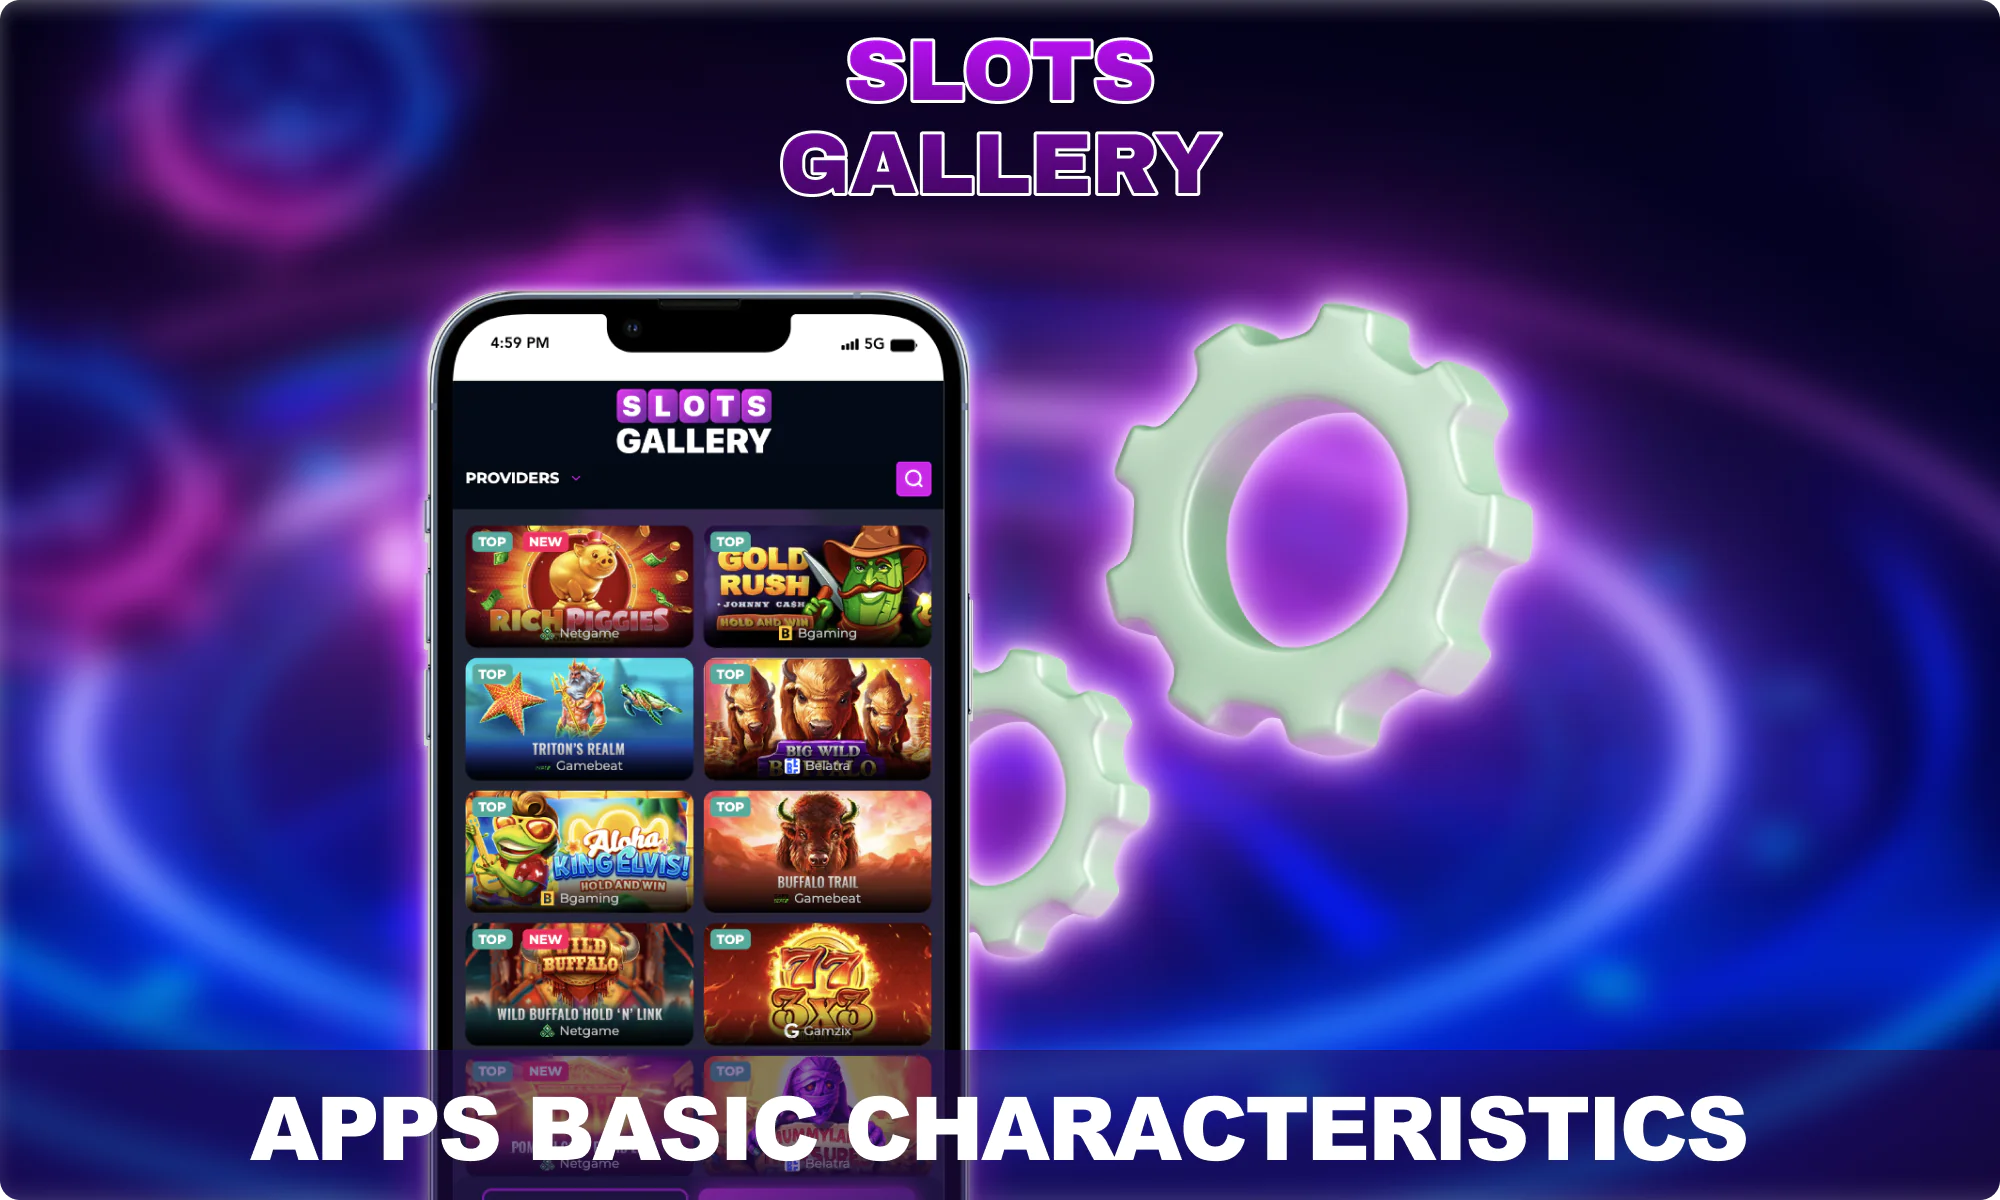 Characteristics of the Slots Gallery App for Canadian players